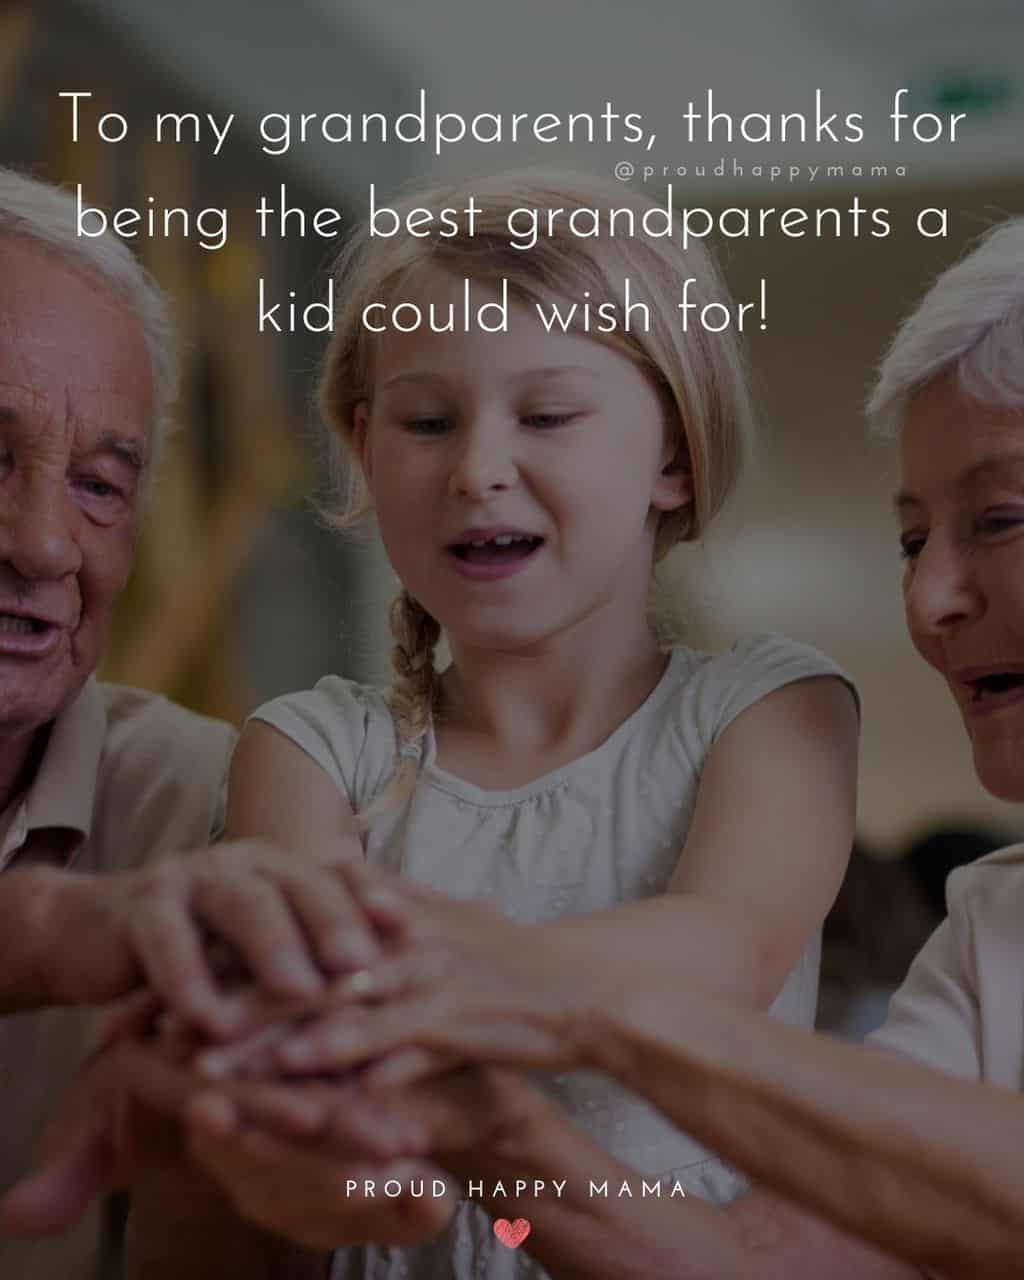 Grandparent Quotes – To my grandparents, thanks for being the best grandparents a kids could wish for!’